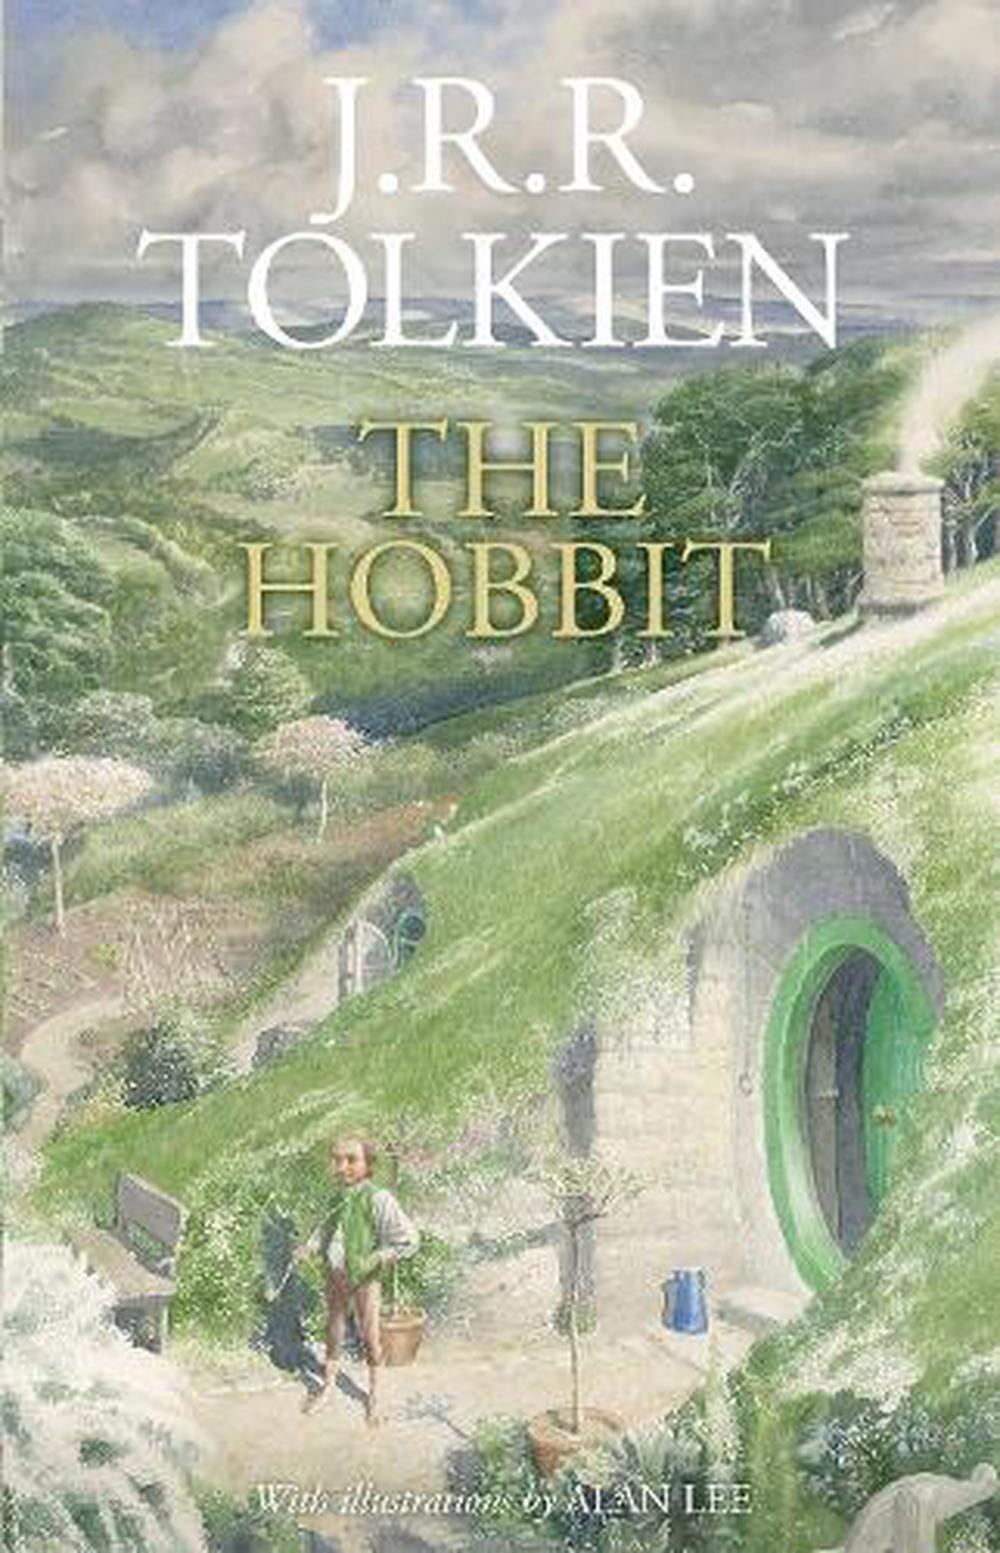 The Annotated Hobbit by J.R.R. Tolkien